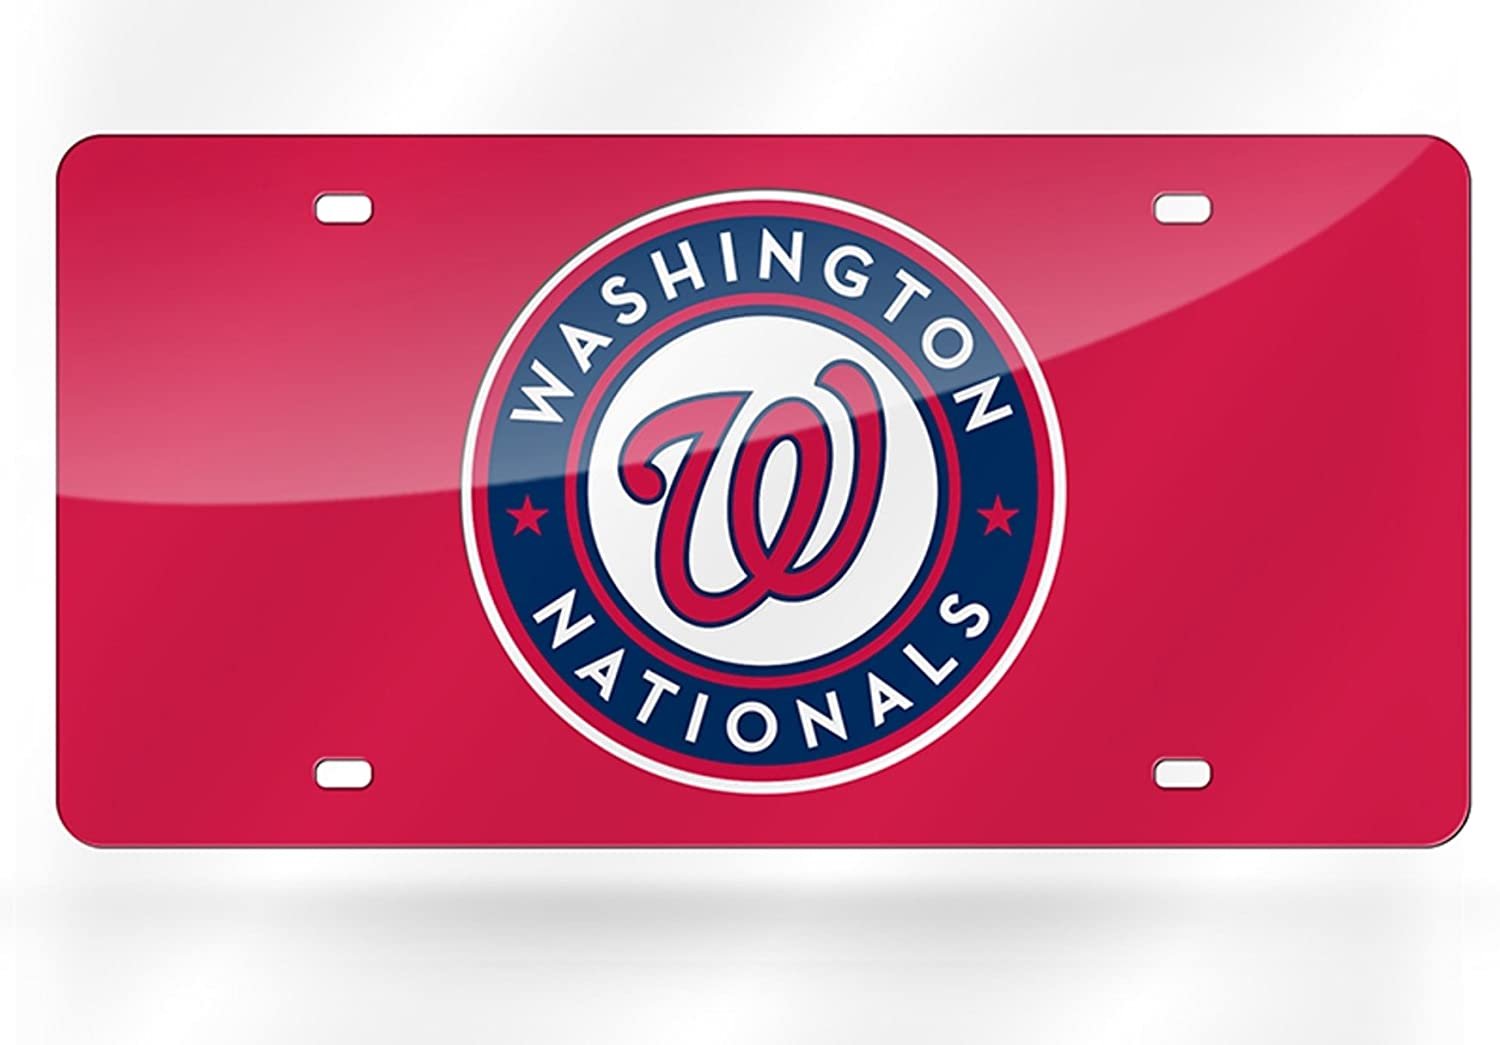 Washington Nationals Premium Laser Cut Tag License Plate, Mirrored Acrylic Inlaid, Red, 12x6 Inch